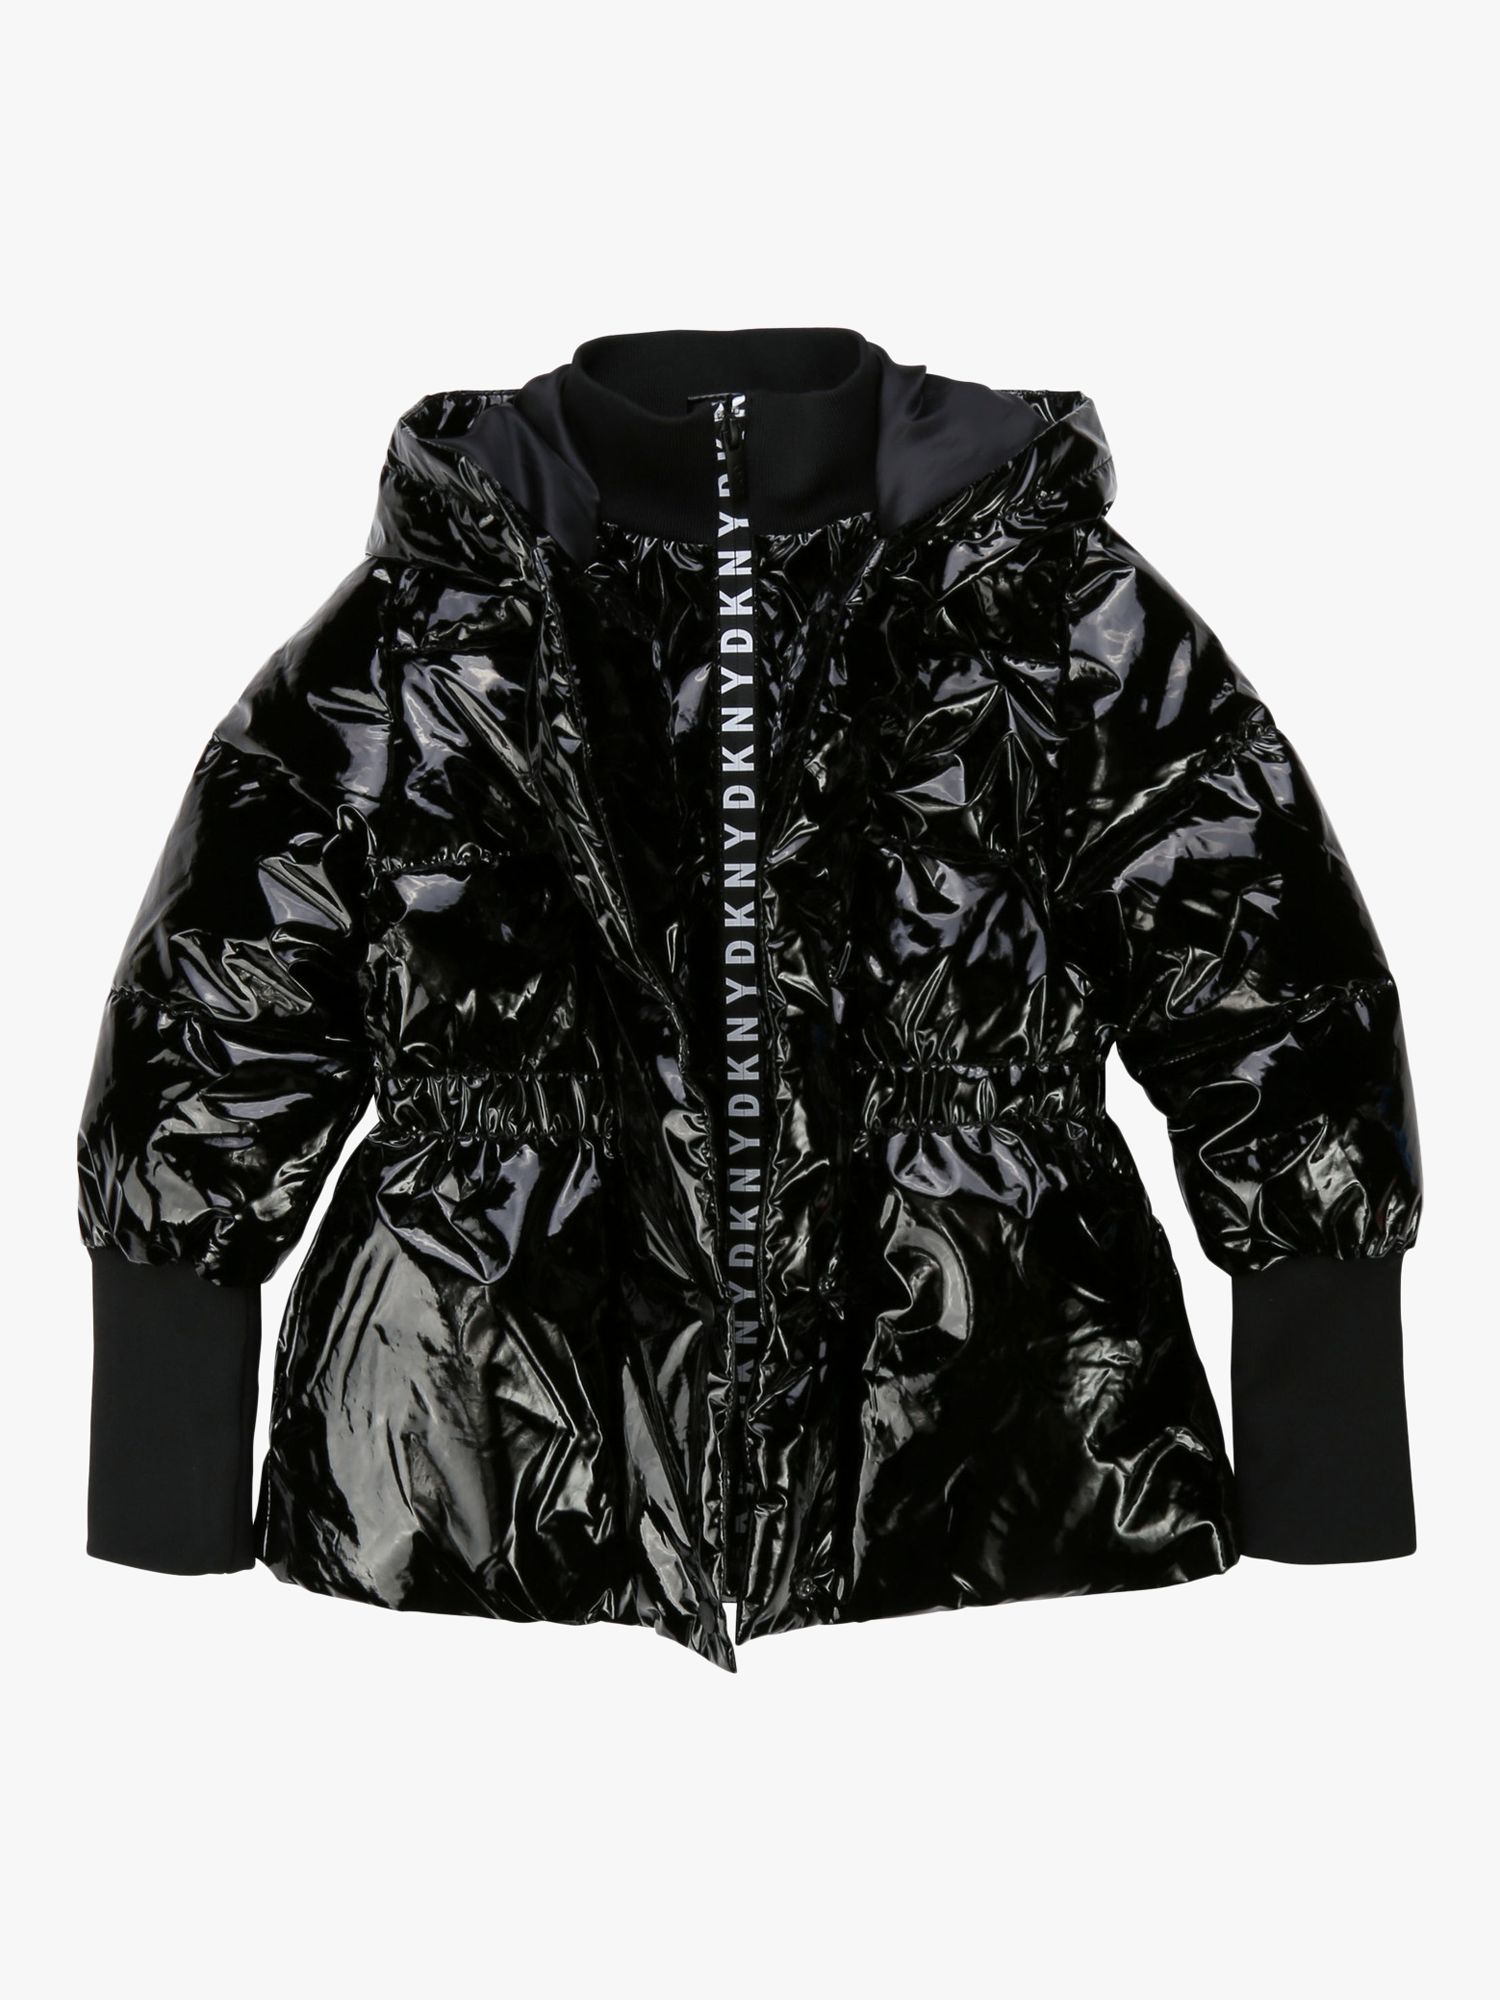 Image of DKNY Girls Water Repellent Hooded Puffer Jacket Black